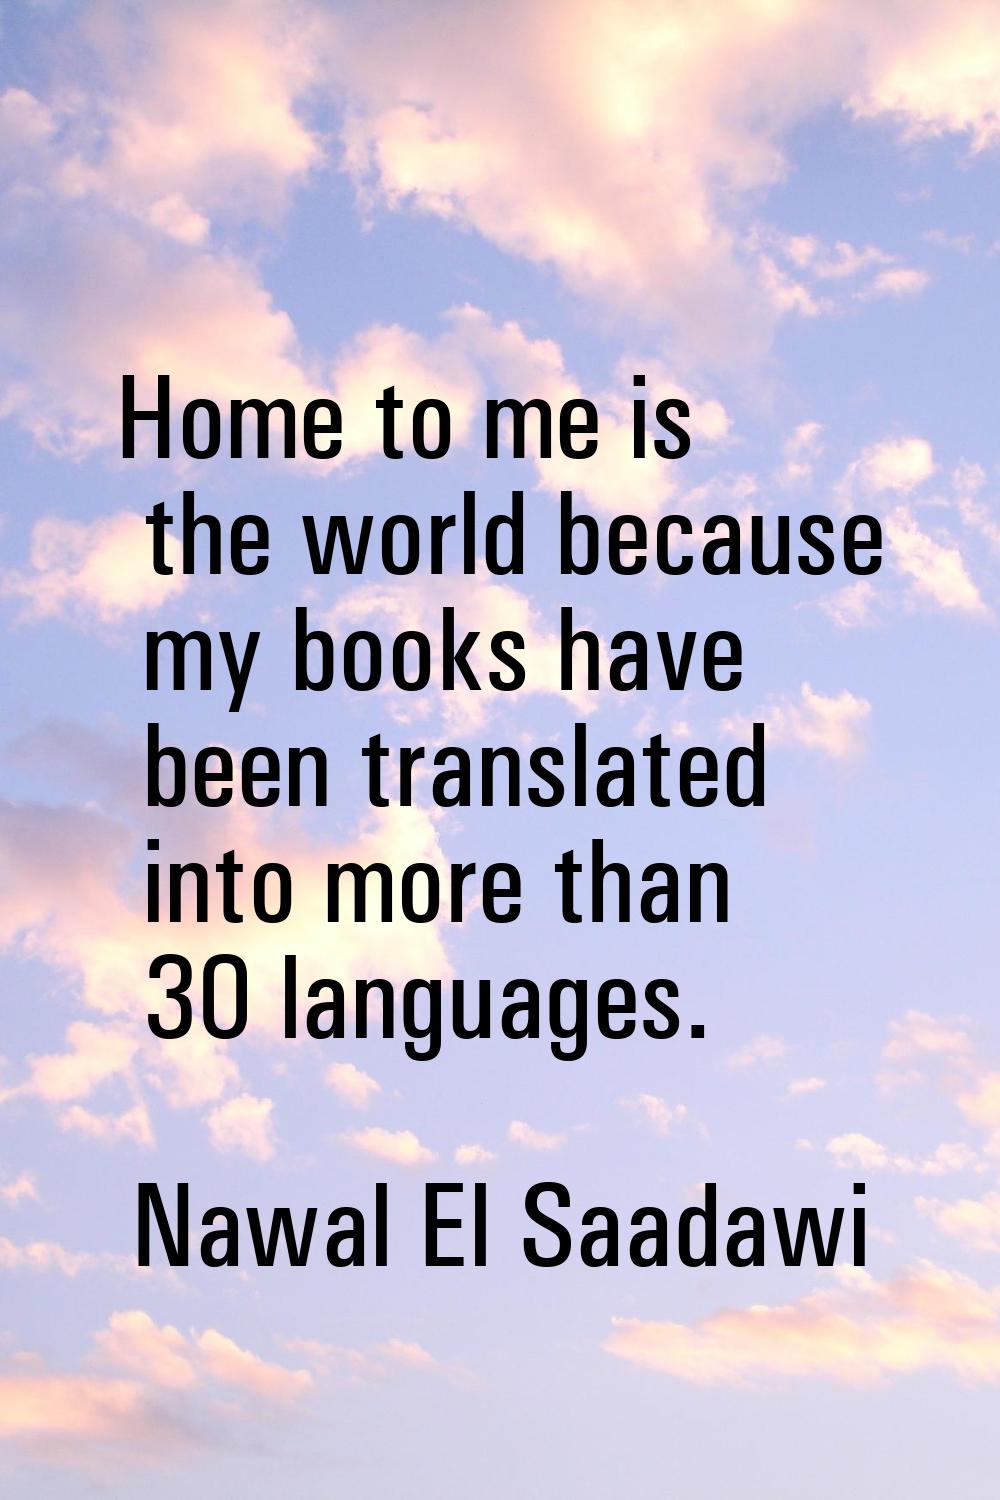 Home to me is the world because my books have been translated into more than 30 languages.